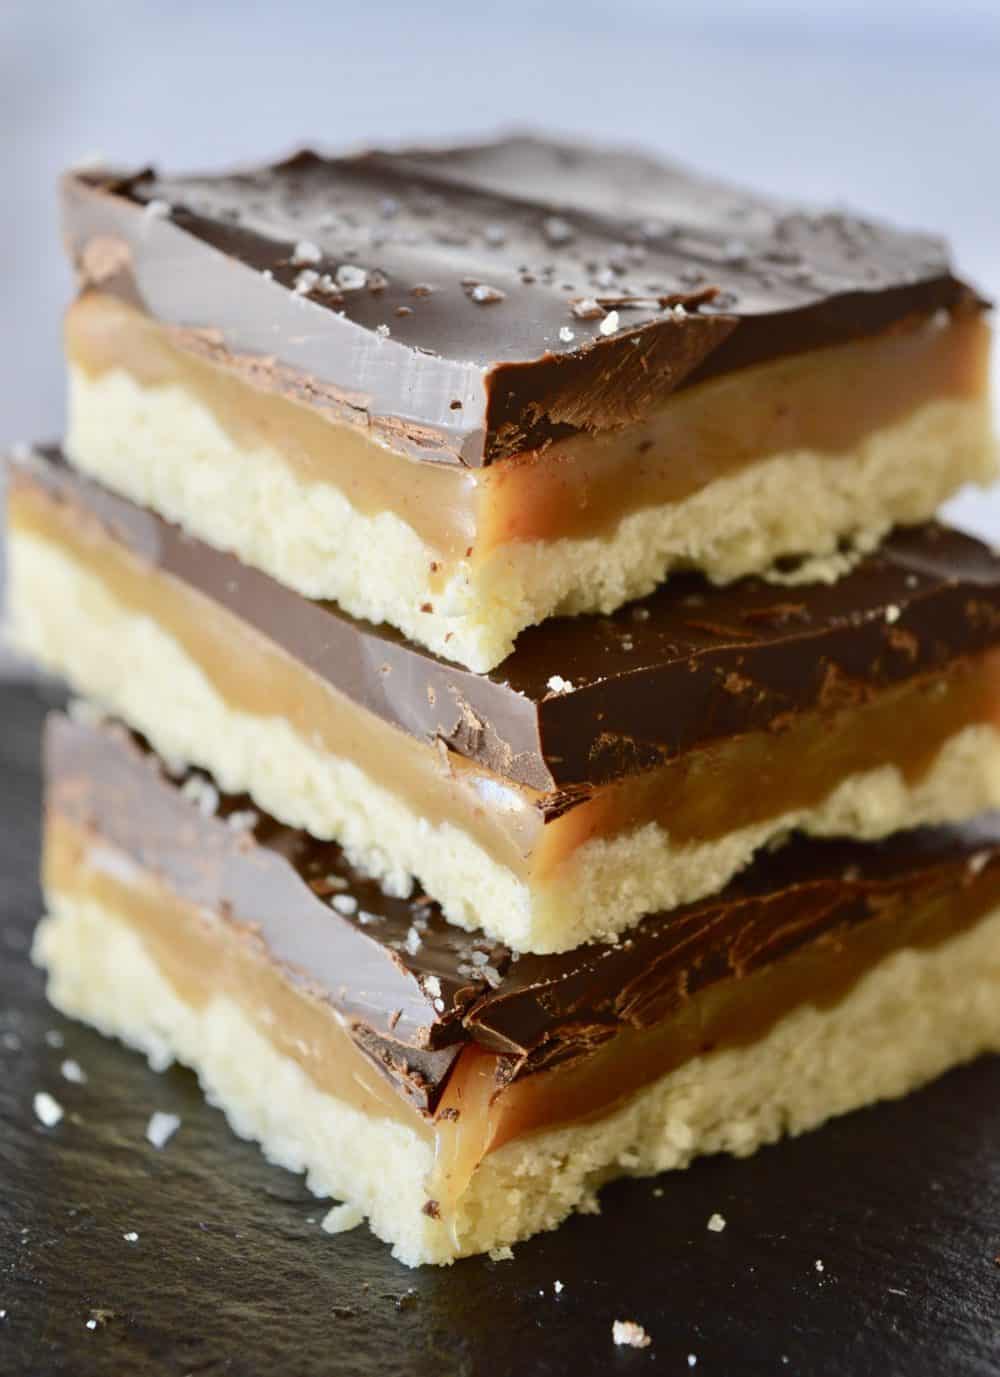 Salted Chocolate Caramel Squares - This Delicious House